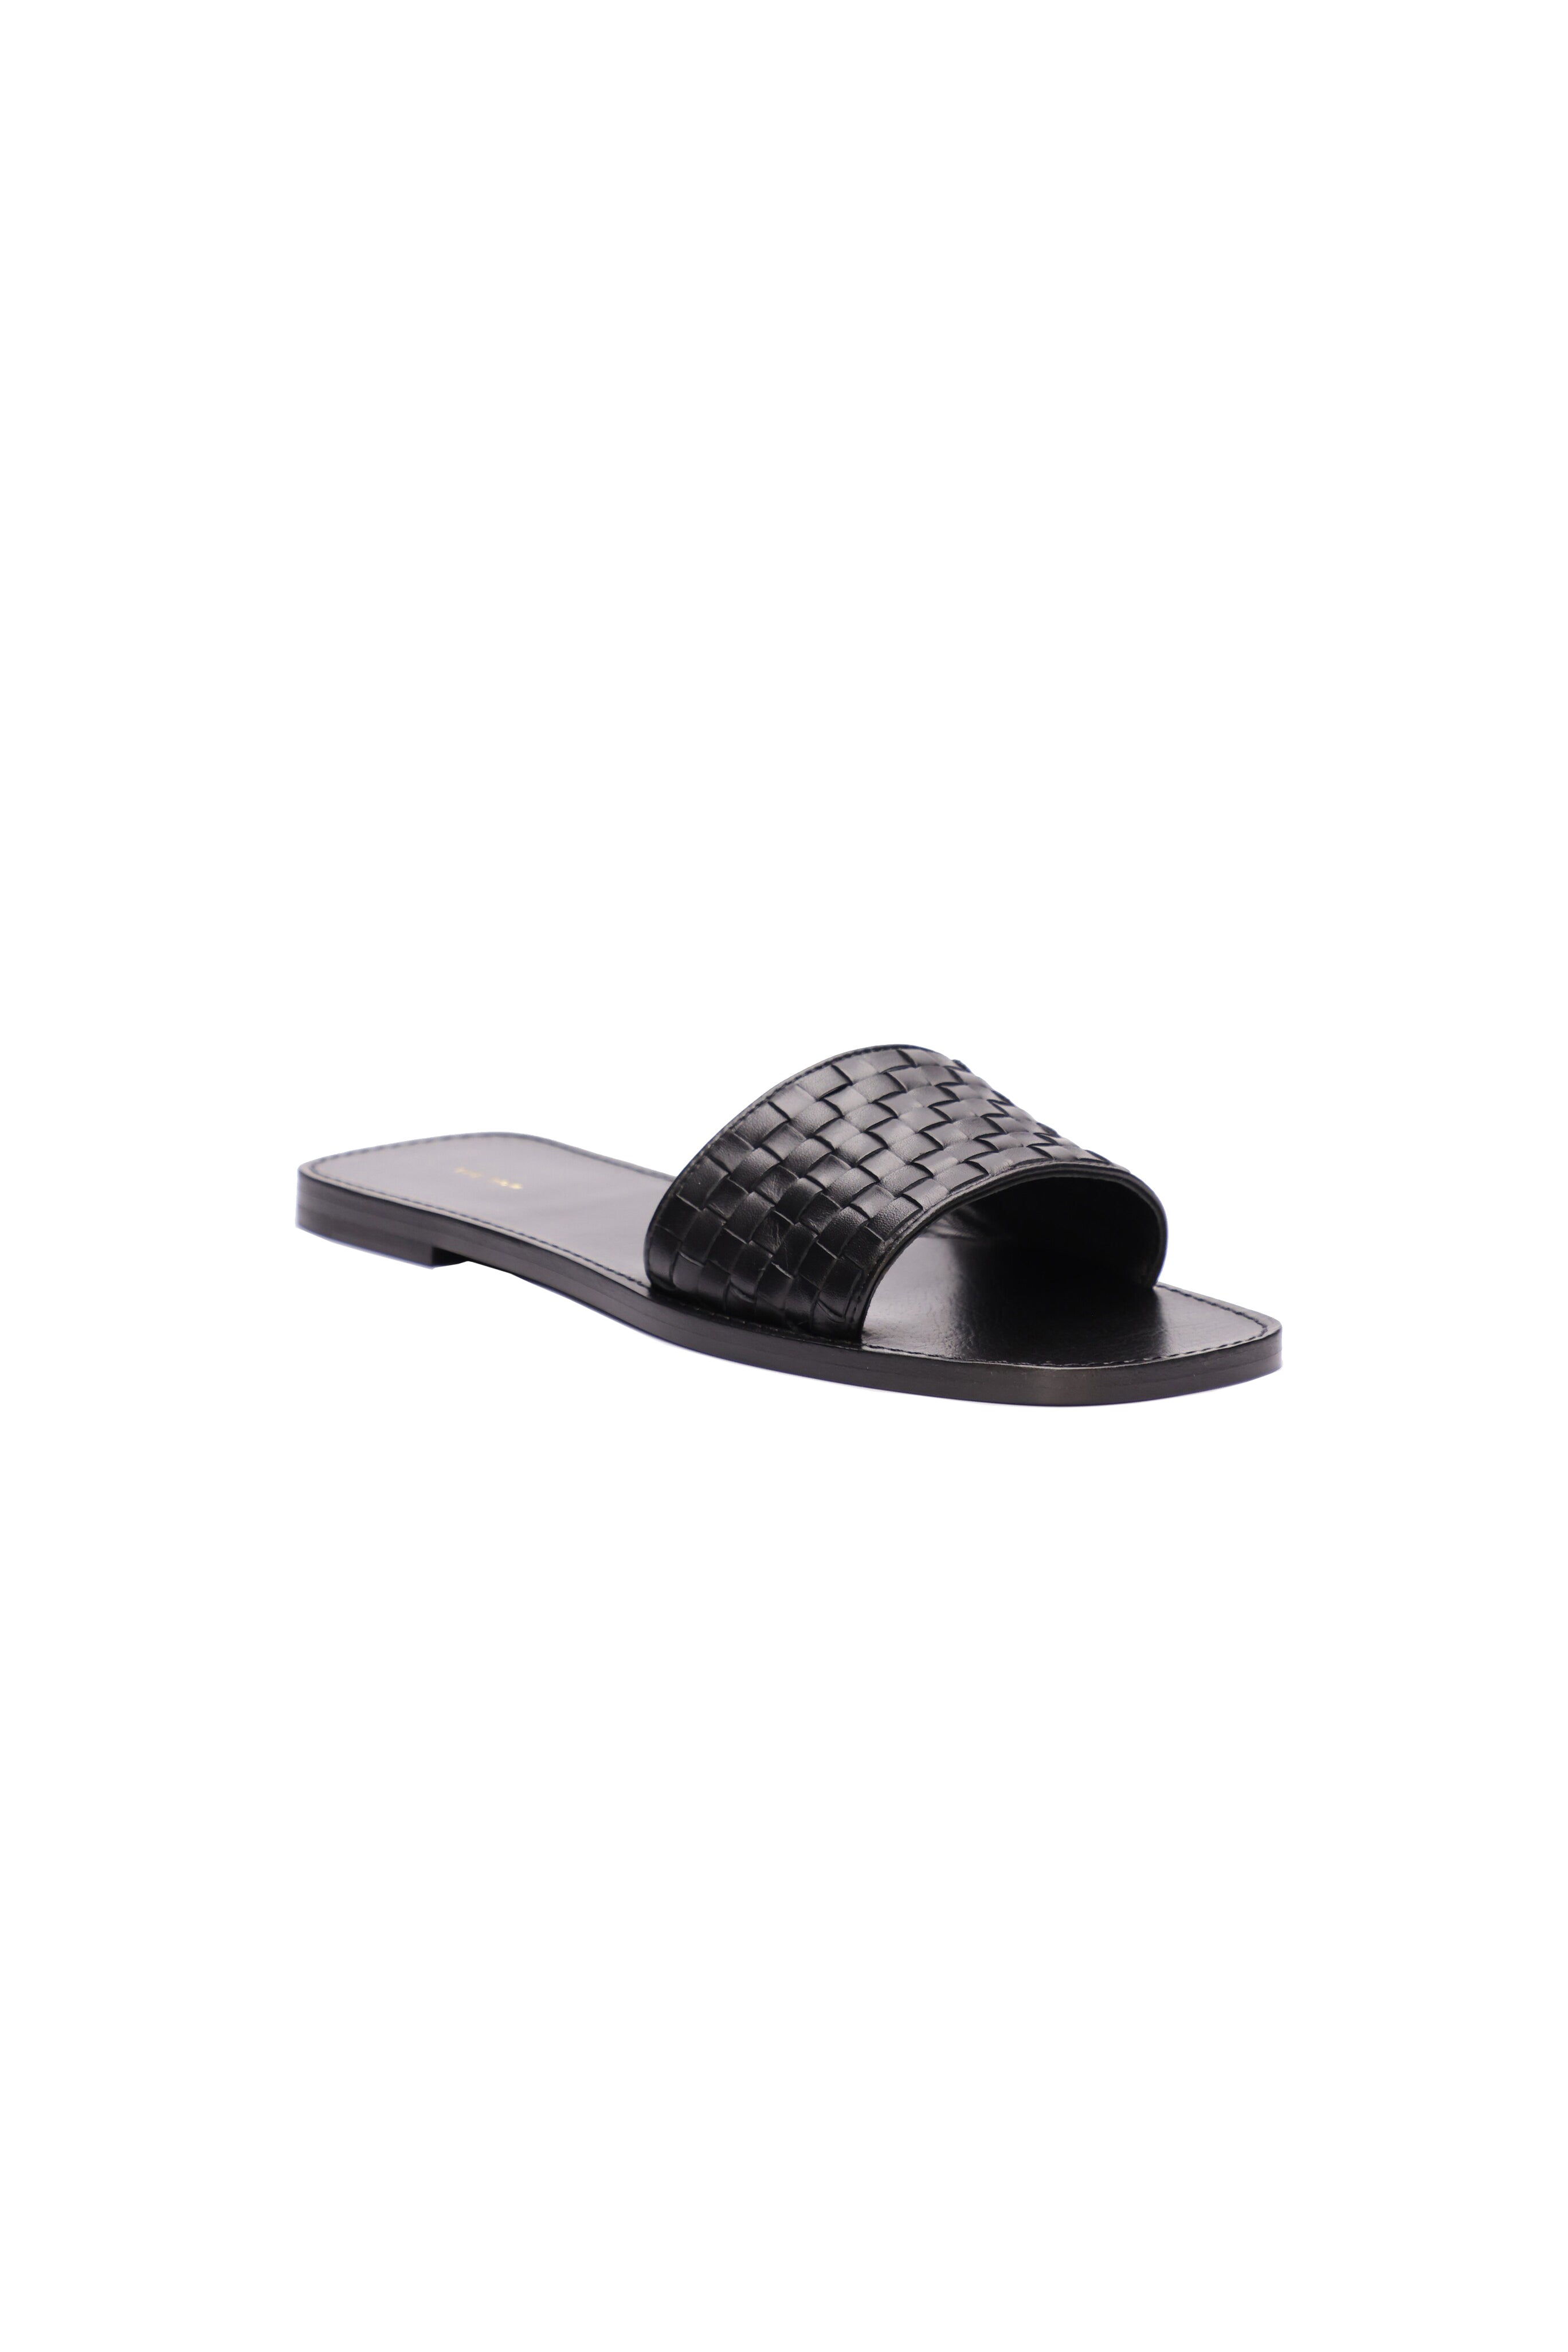 THE ROW Link Slide Sandals